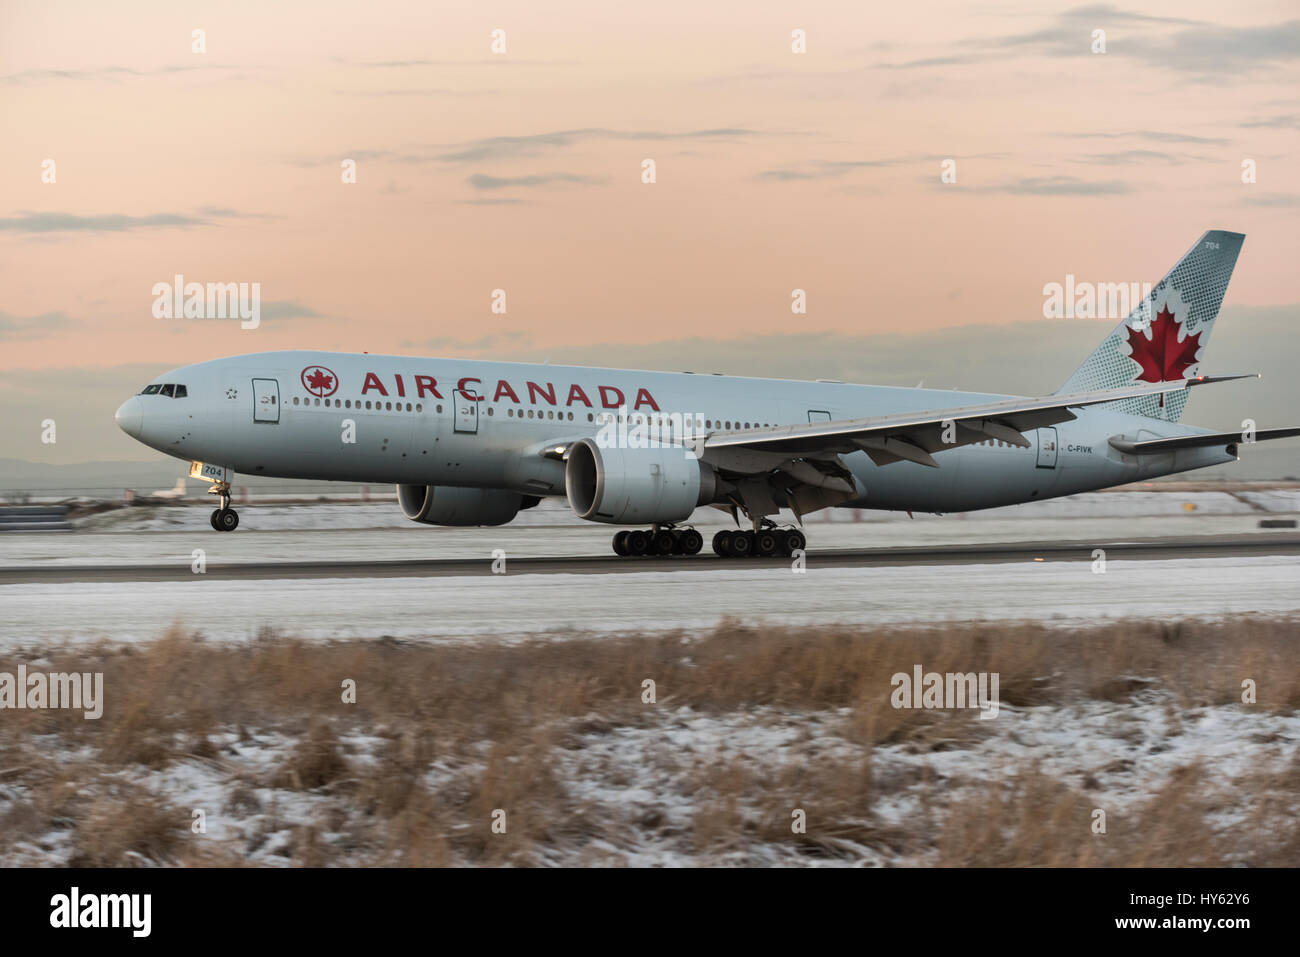 Air Canada Boeing 777-233(LR) landing at YVR, Vancouver International Airport. Stock Photo